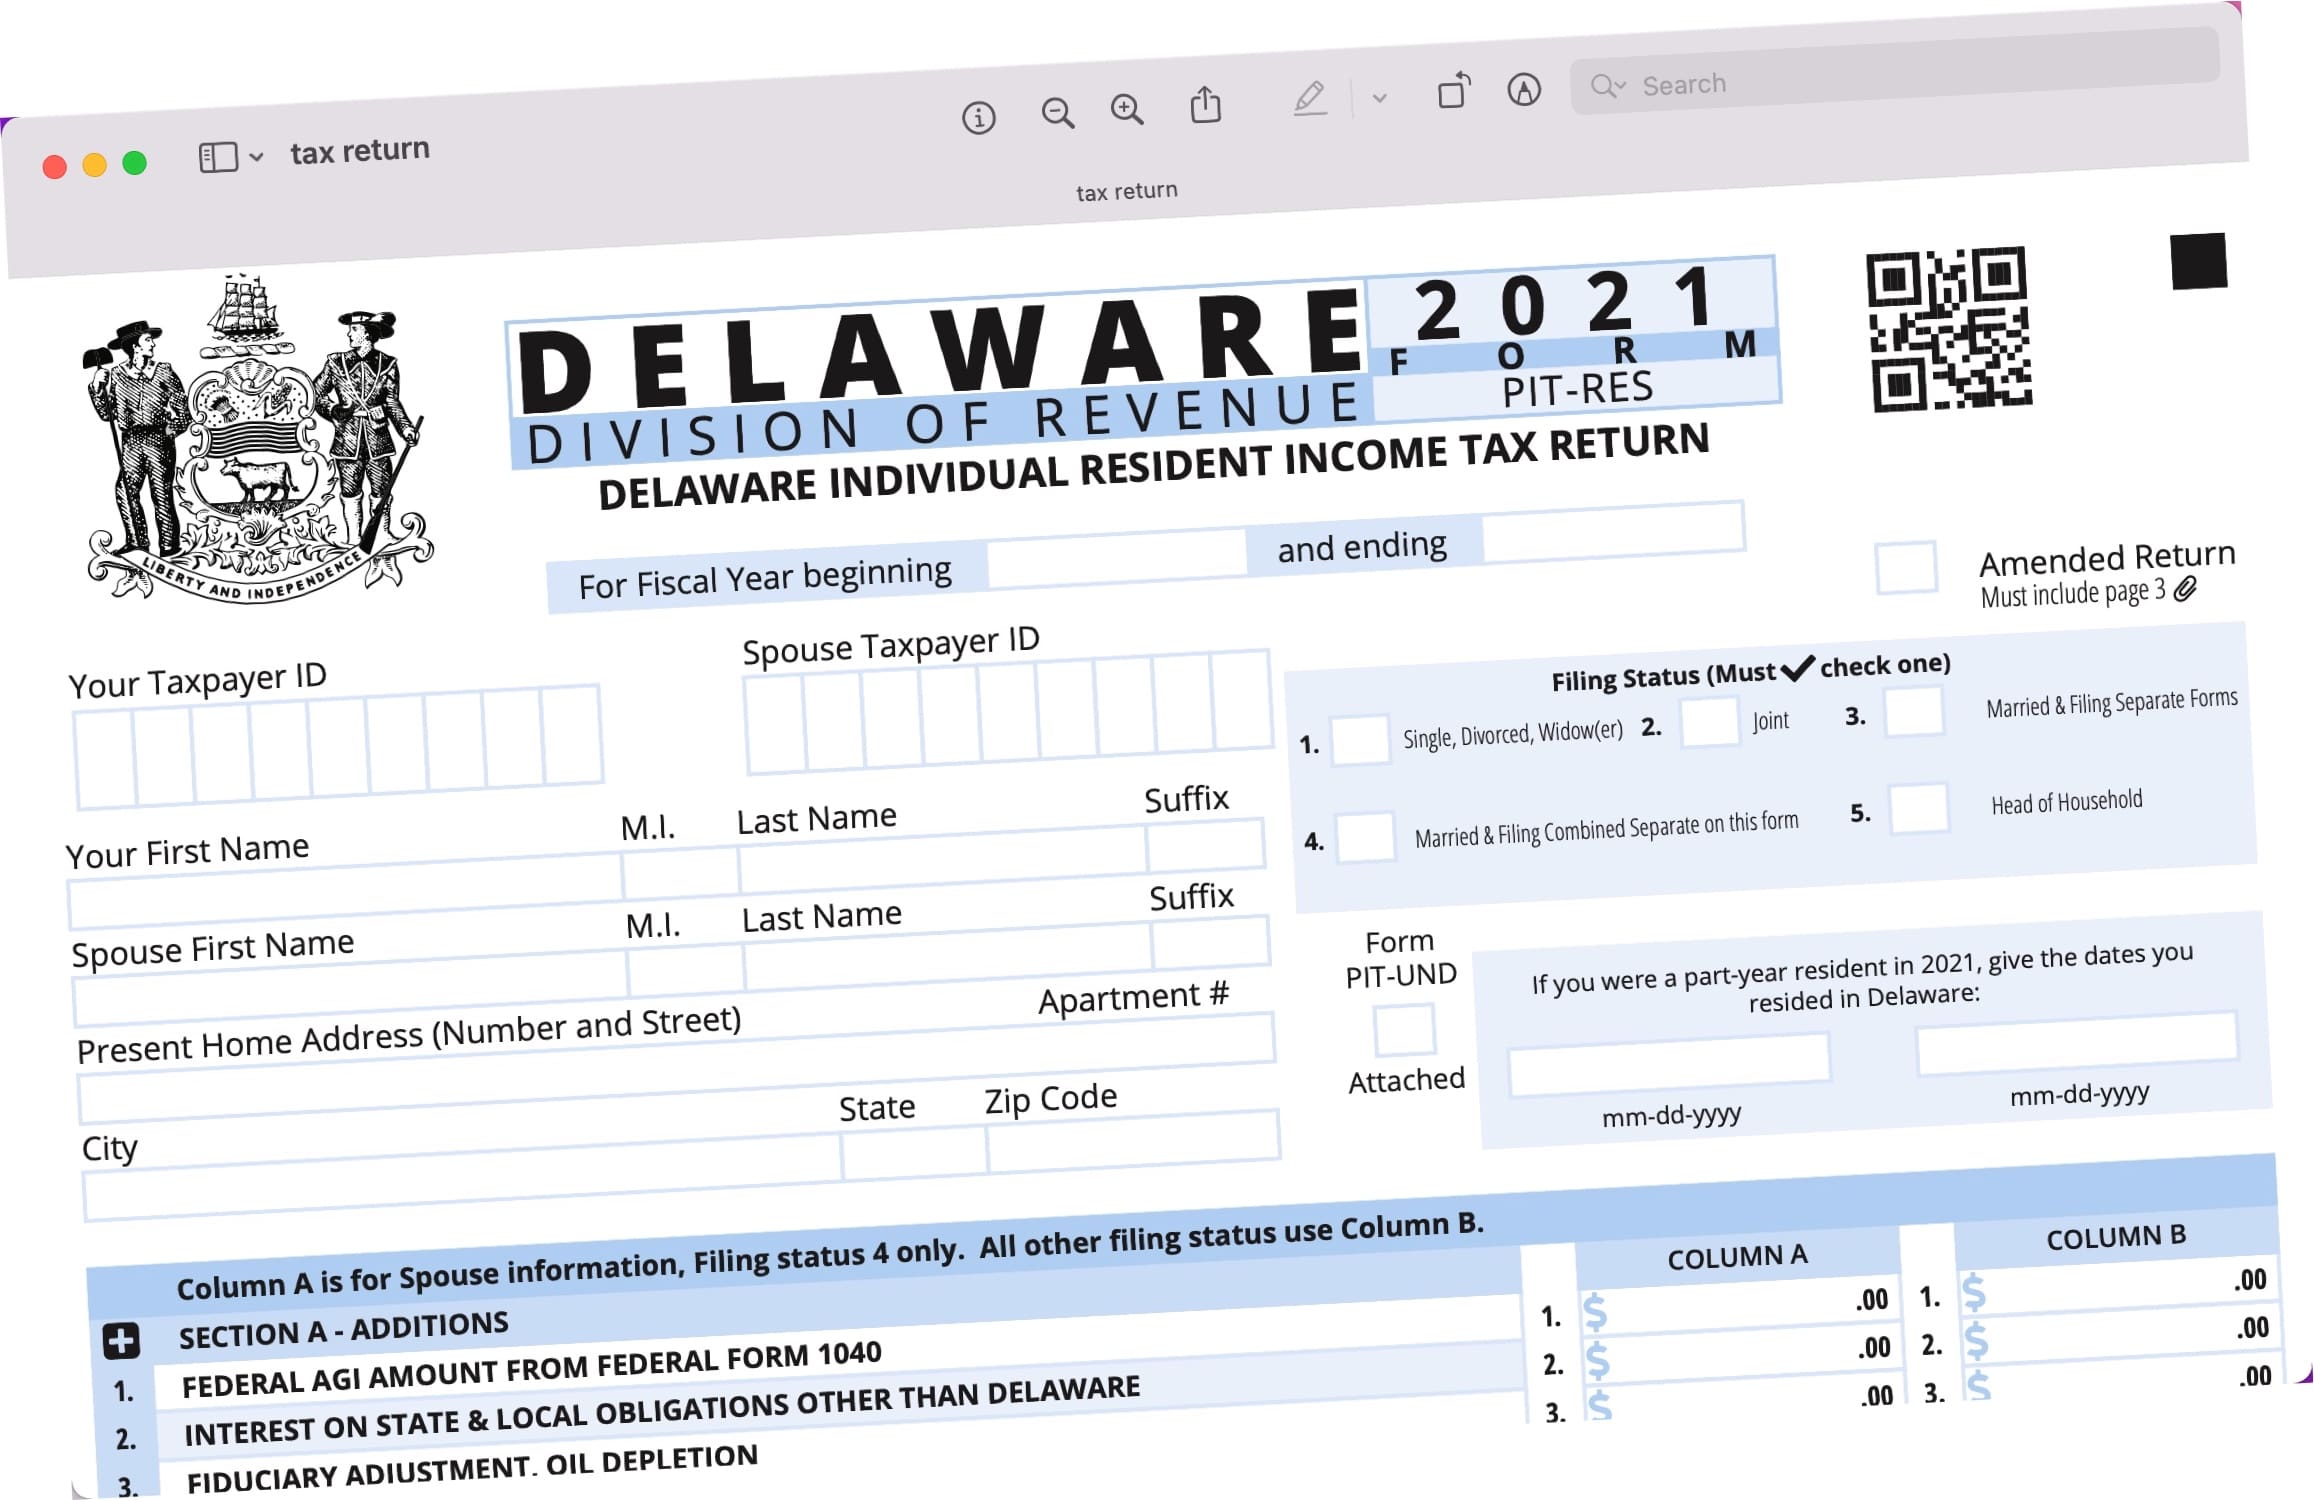 Featured image for “Del. tax booklets delayed in delivery to libraries”